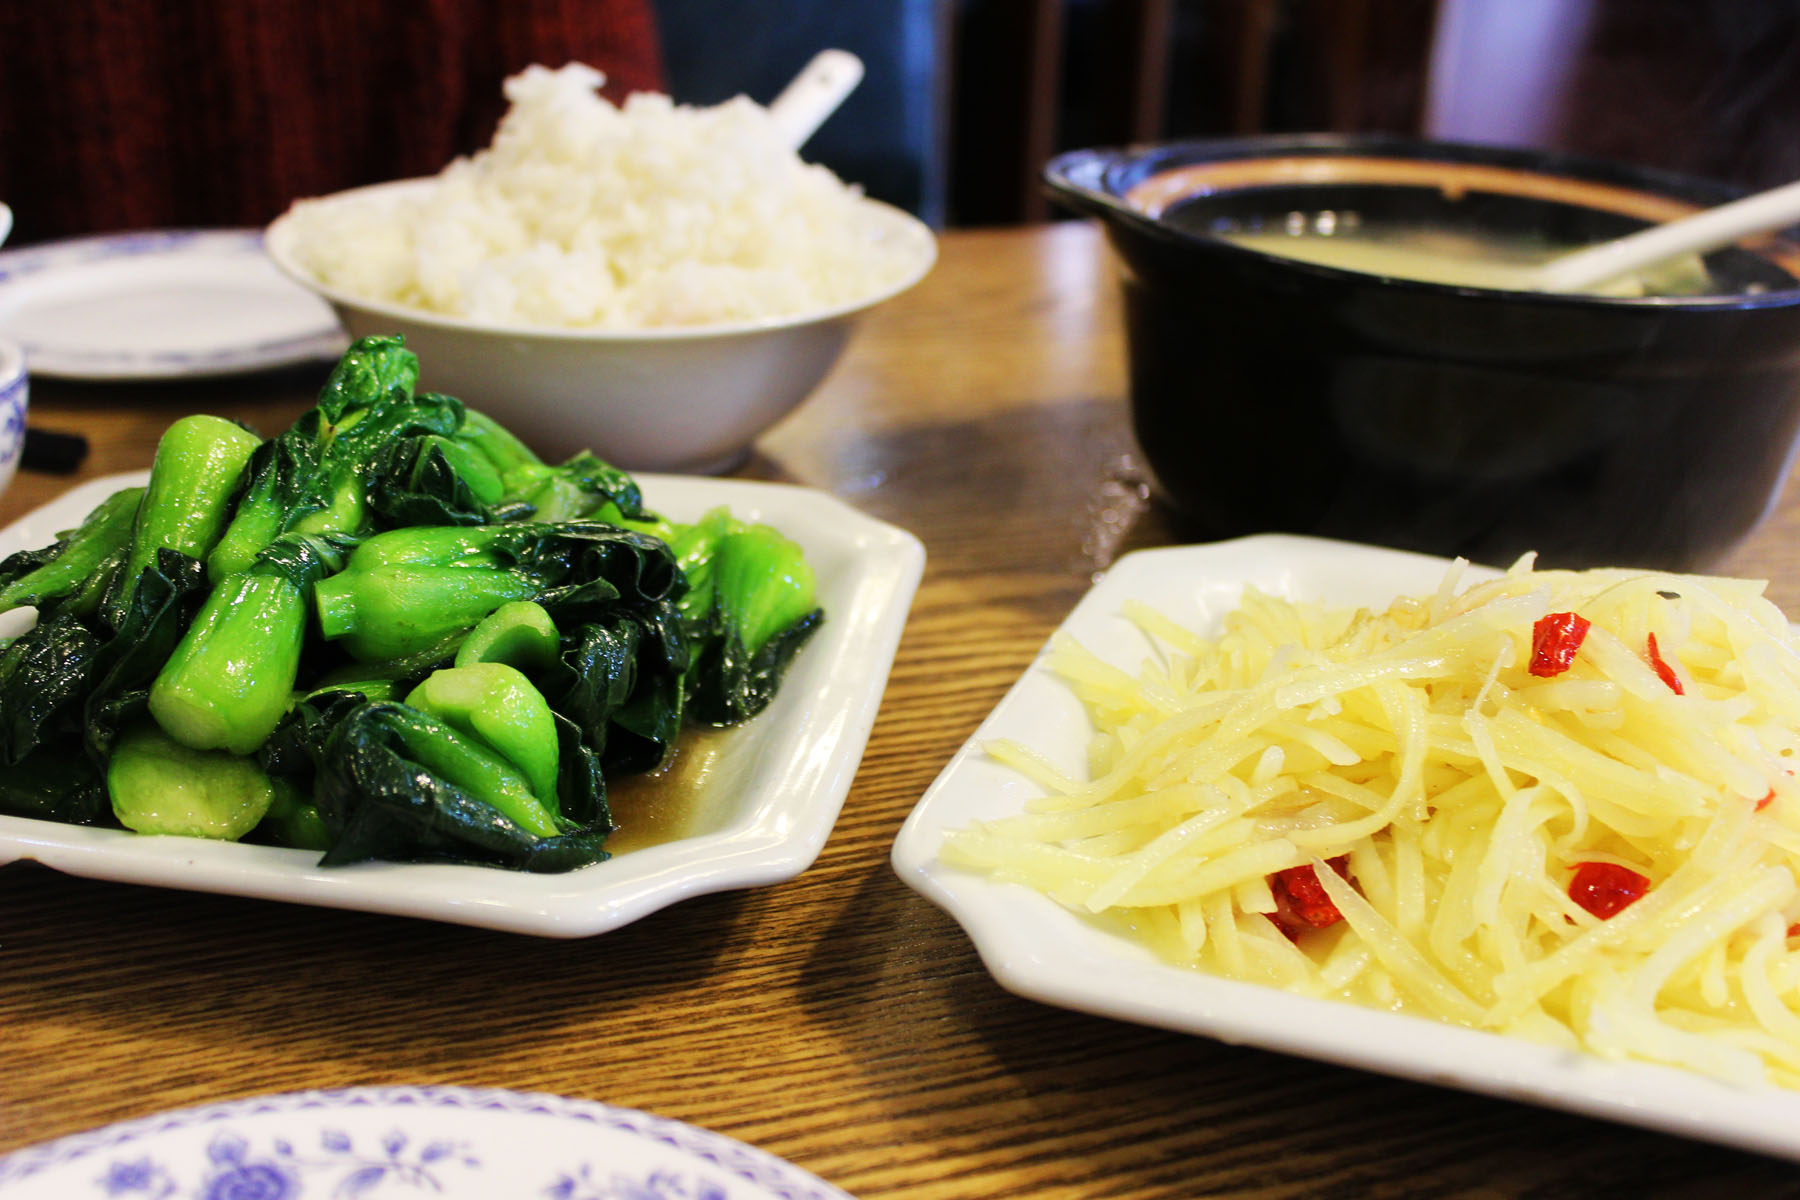 A Guide to Finding Vegetarian Food in China